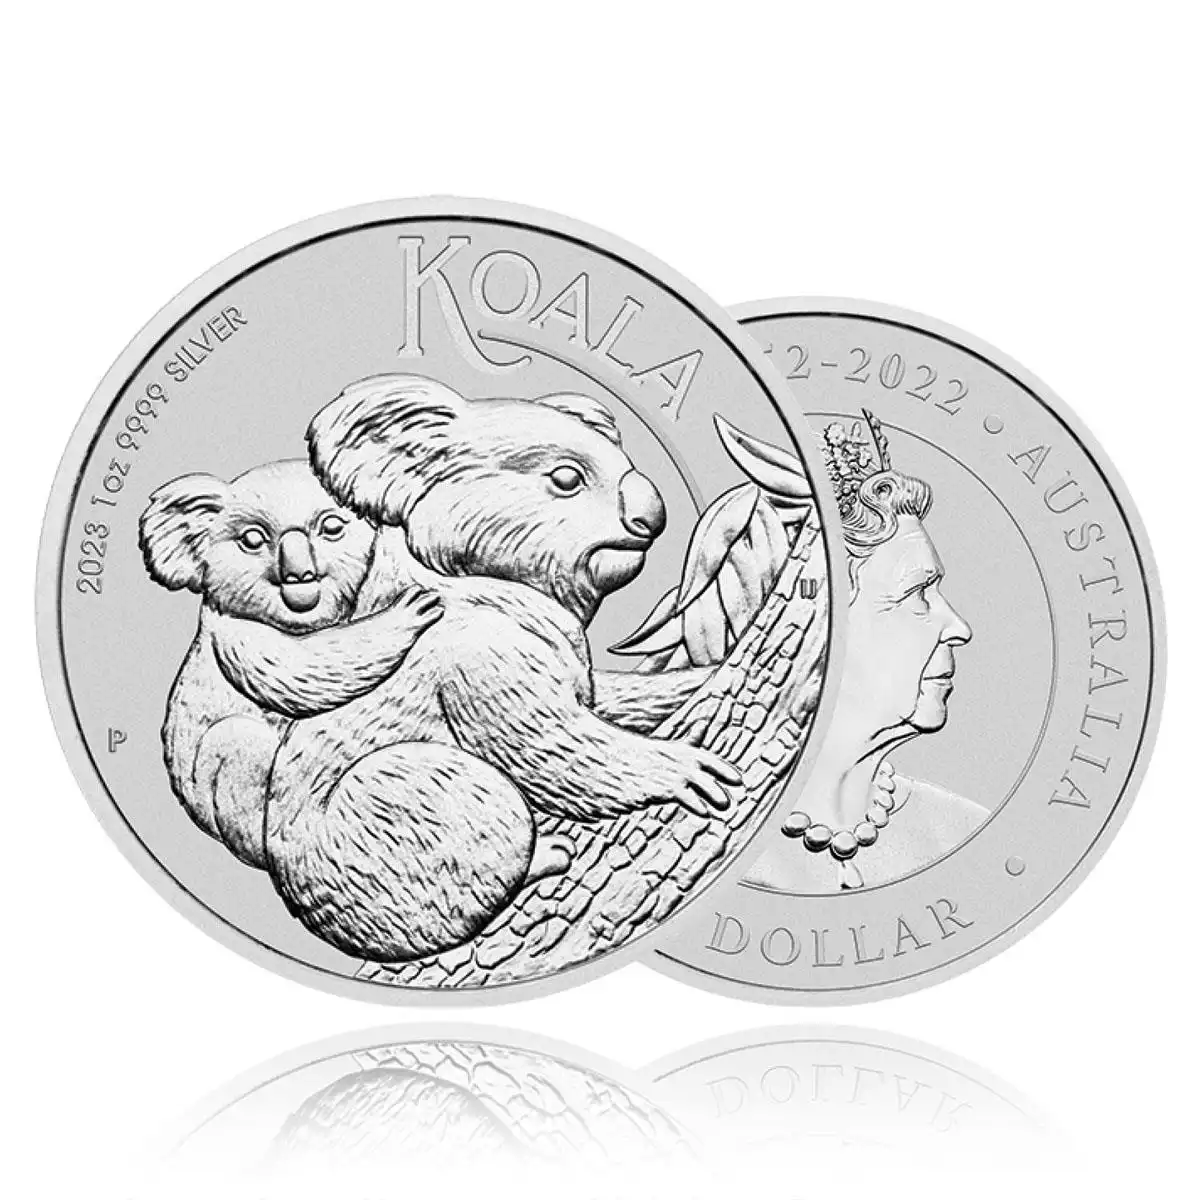 1oz silver coin 2023 koala - perth mintdepicting one of australia’s most beloved animals, the australian koala silver coins pay tribute to our rich wi...